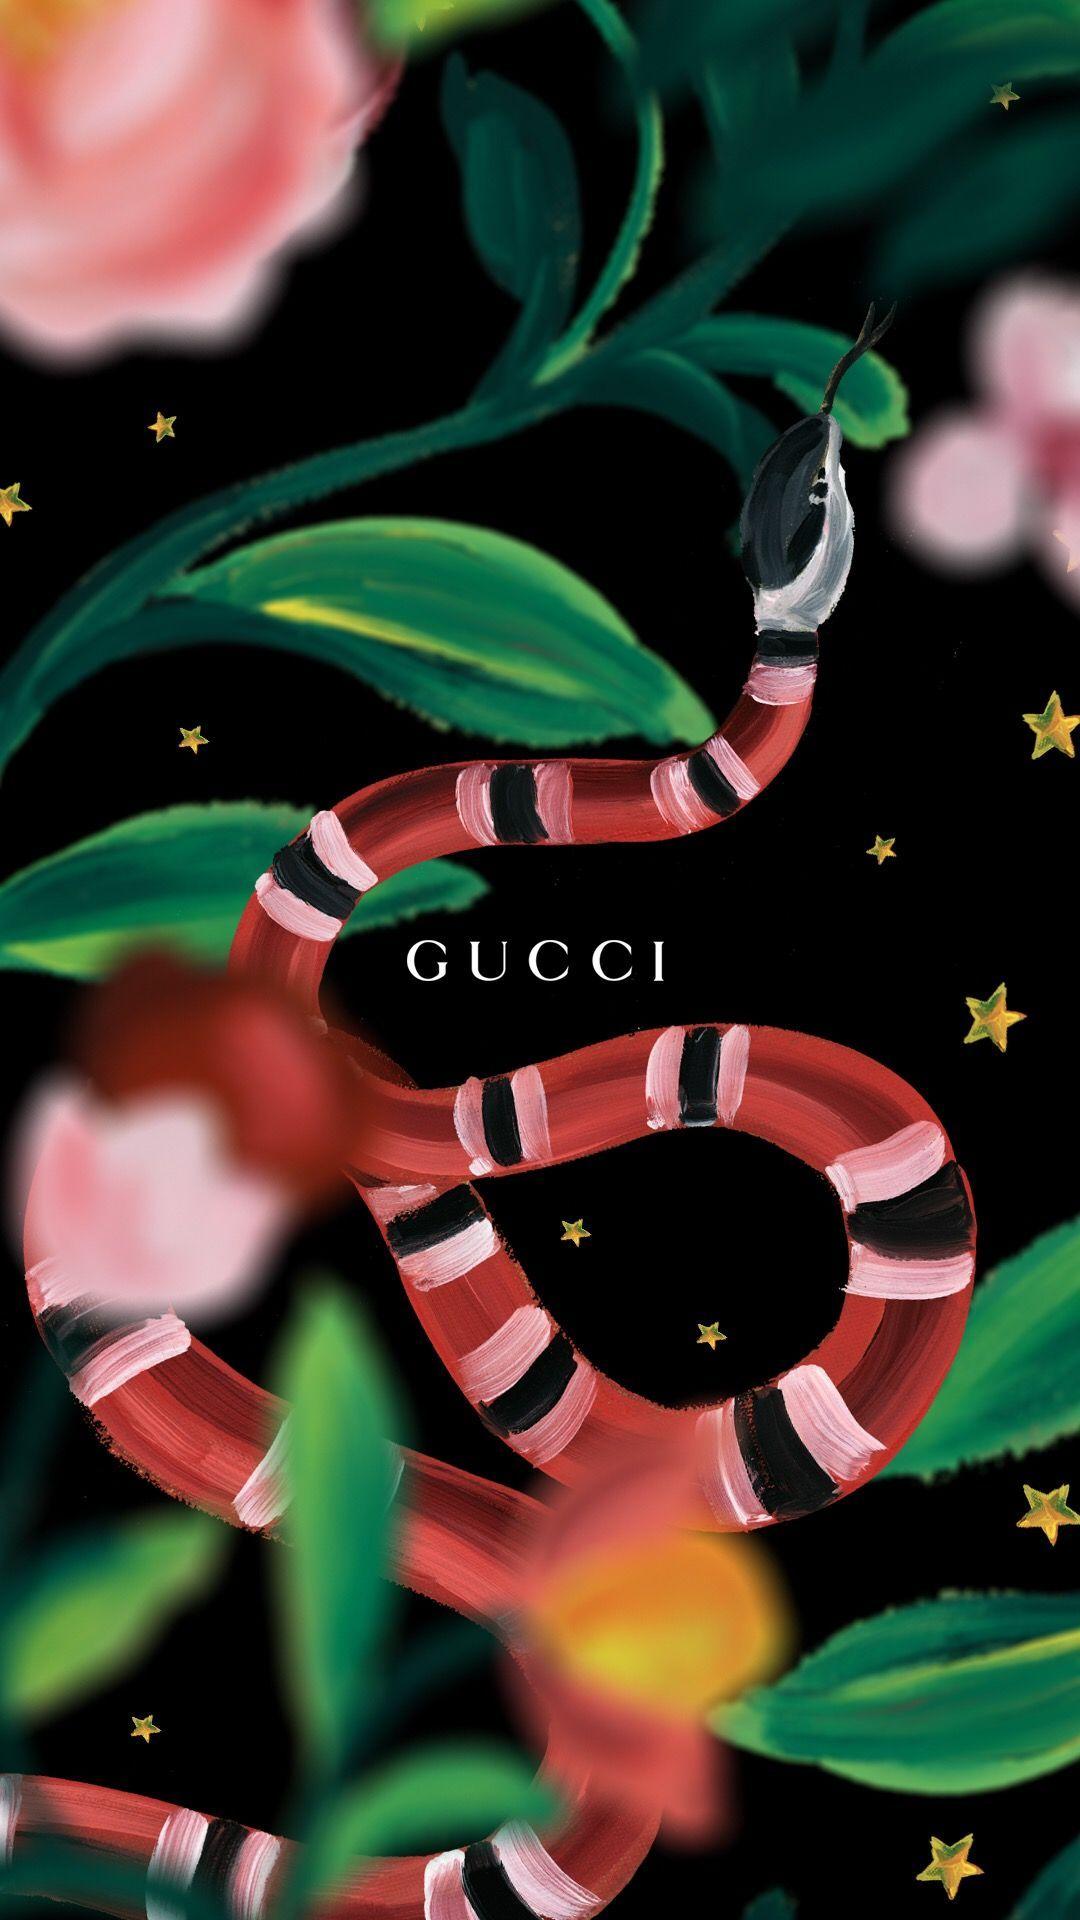 Gucci Iphone Hd Wallpapers Top Free Gucci Iphone Hd Backgrounds Wallpaperaccess